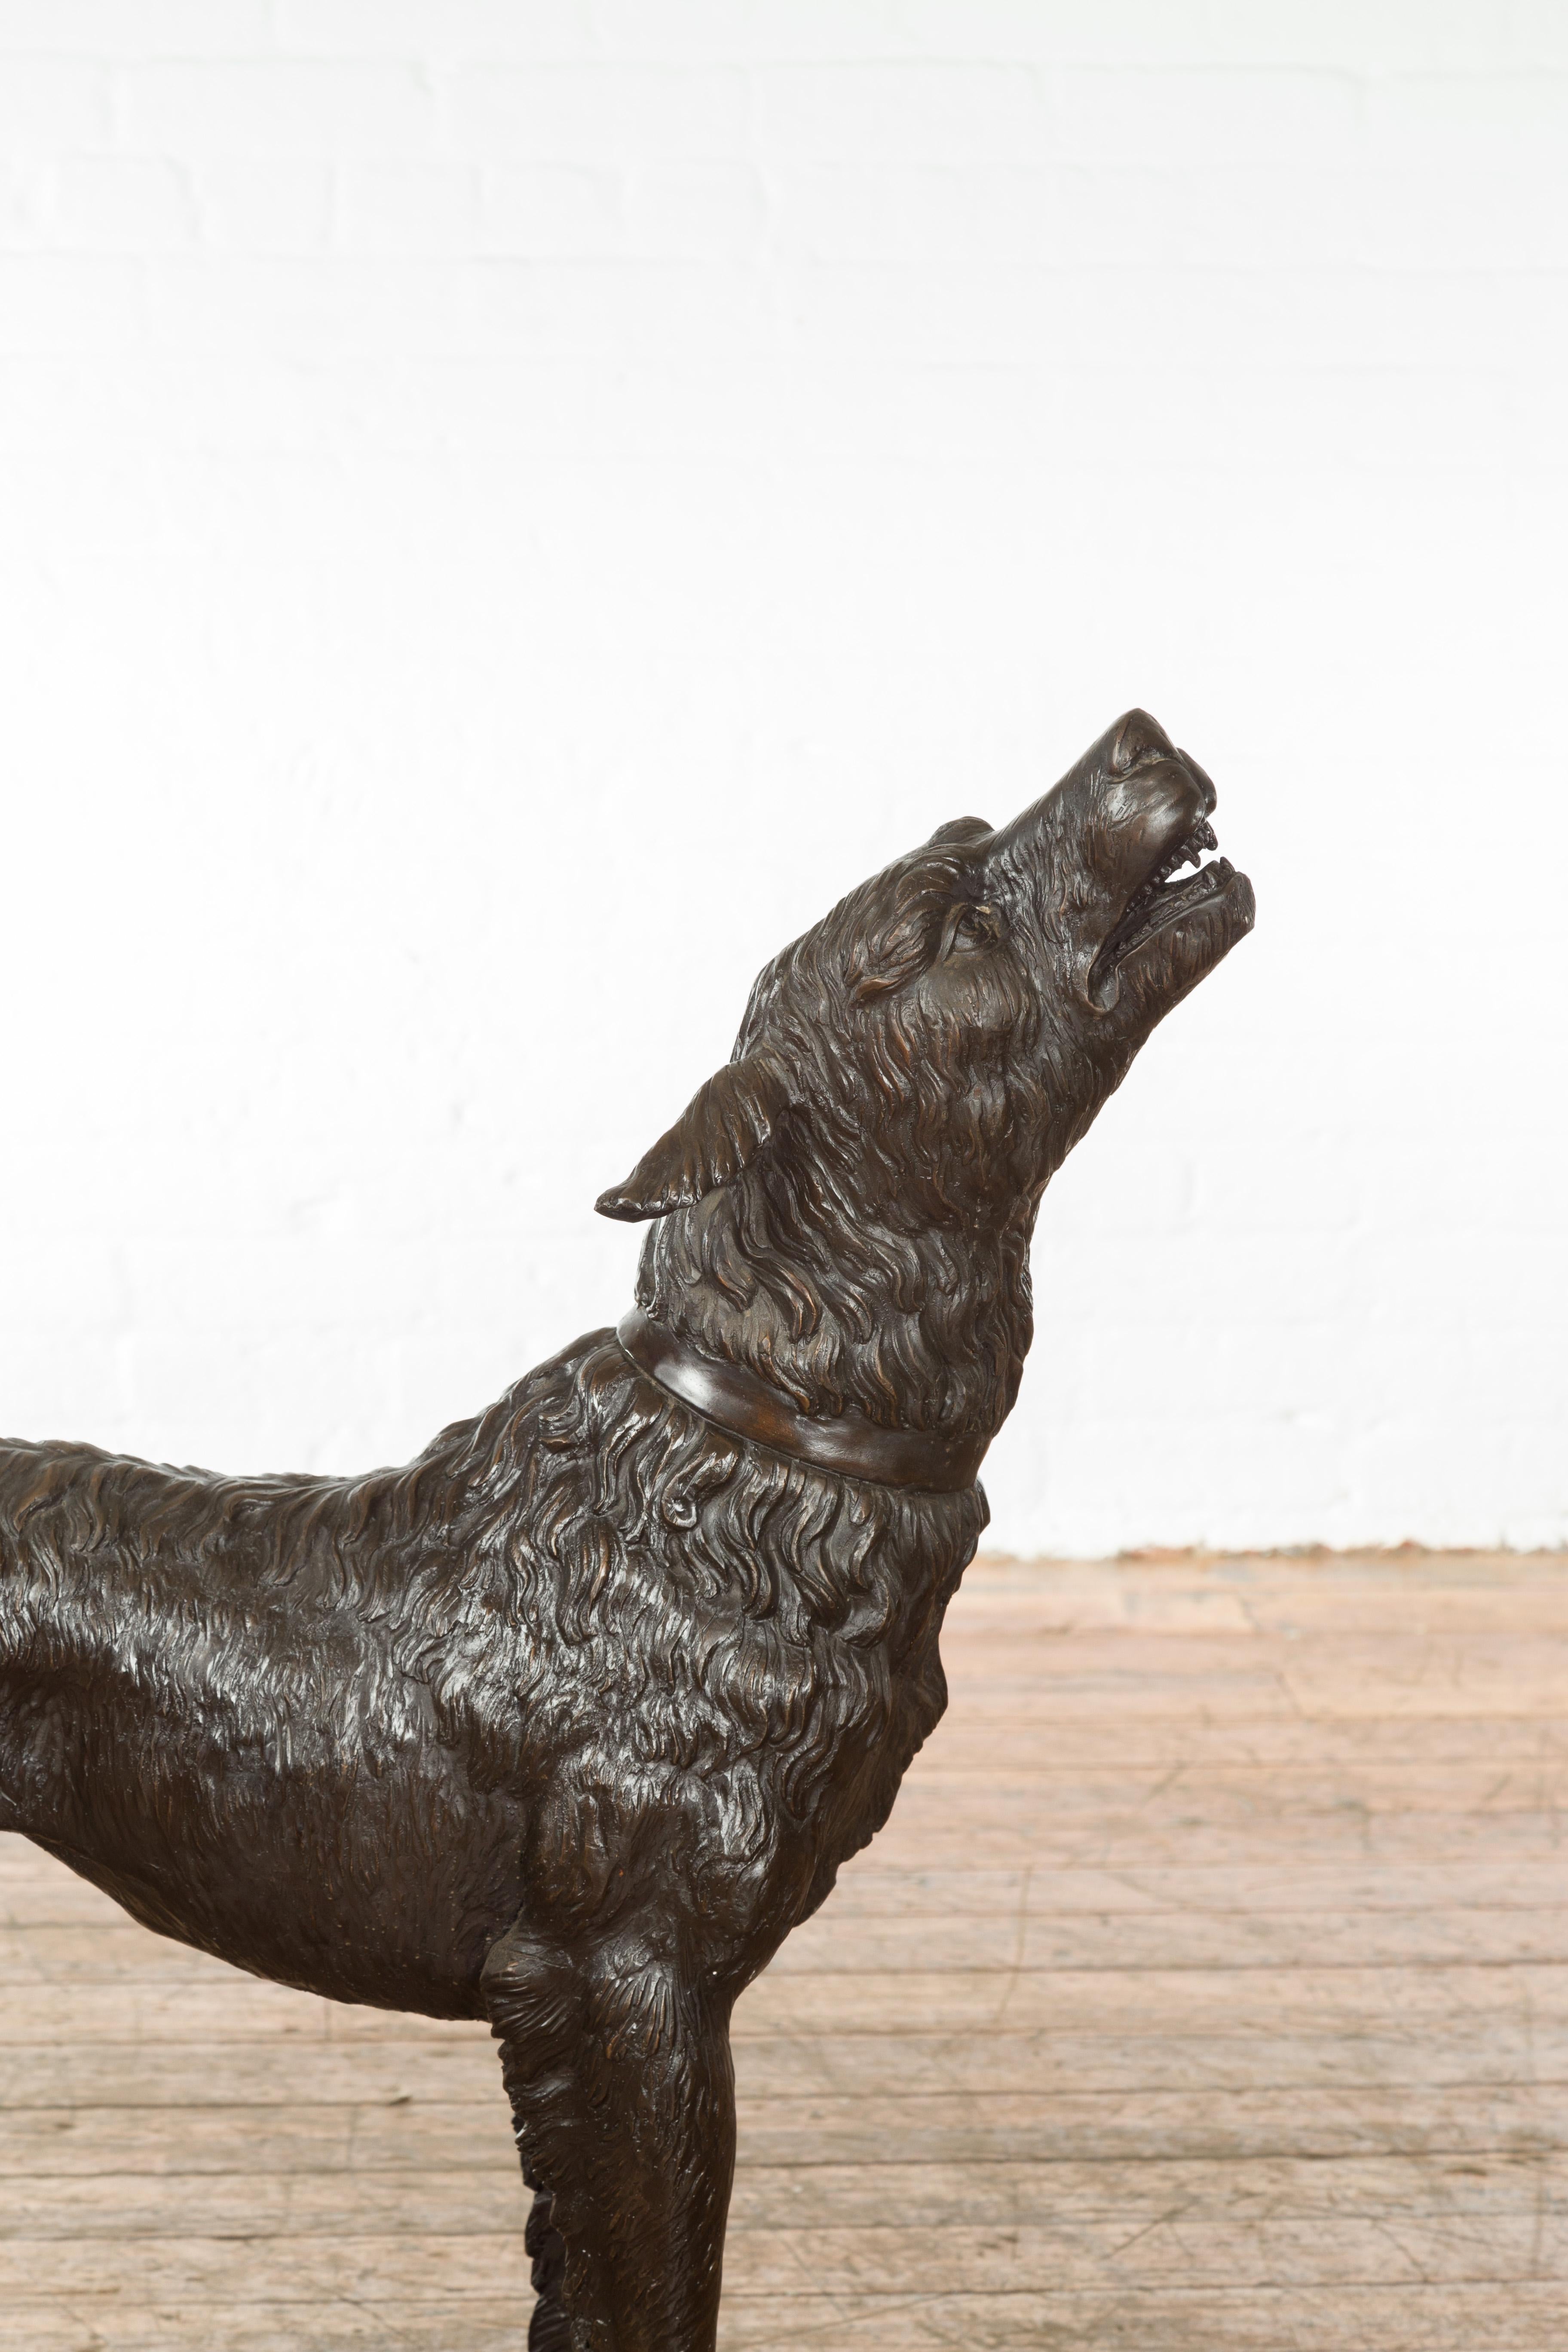 20th Century Vintage Lost Wax Cast Bronze Sculpture of a Howling Dog with Textured Patina